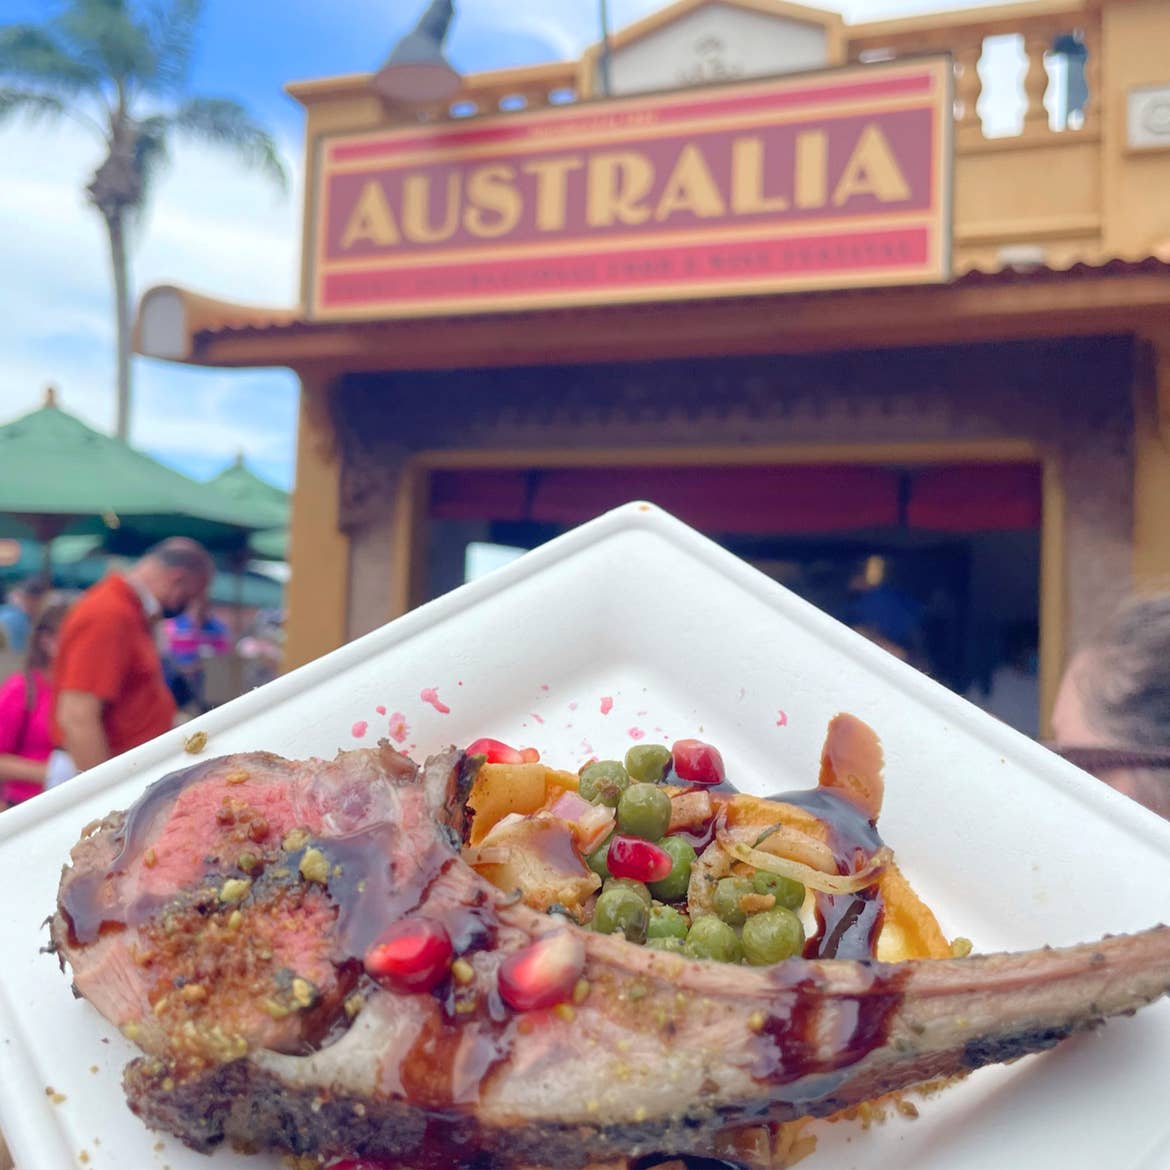 A roasted Lamb Chop with Sweet Potato Purée, Bush Berry Pea Salad, and Pistachio-Pomegranate Gremolata sits on a white, square plate near the Australia Kiosk at Epcot.